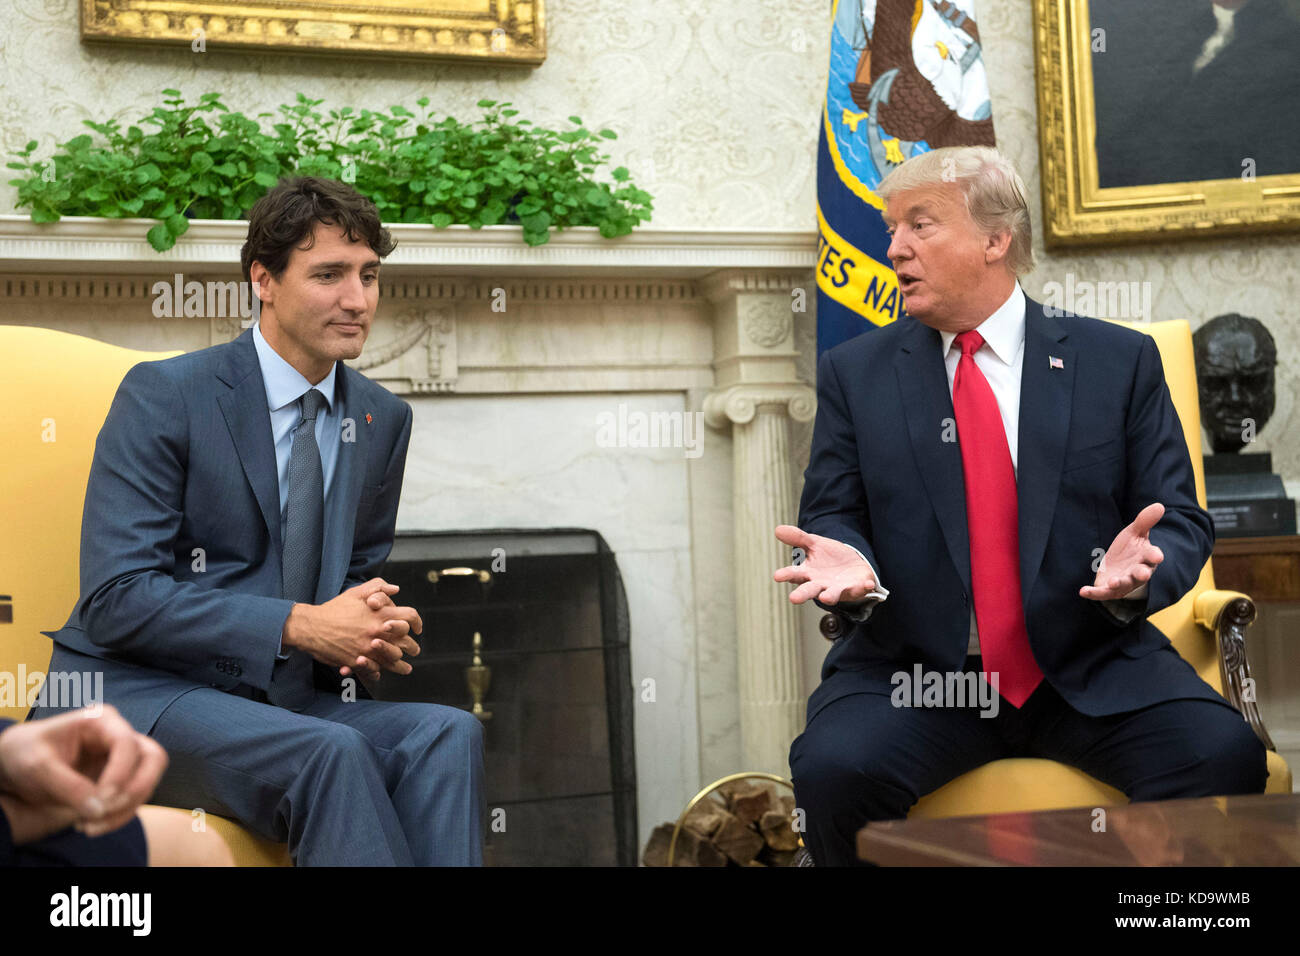 Washington DC, USA. 11th Oct, 2017. United States President Donald Trump speaks alongside Canadian Prime Minister Justin Trudeau during a meeting in the Oval Office at the White House in Washington, DC on October 11, 2017. Credit: Kevin Dietsch/Pool via CNP /MediaPunch Credit: MediaPunch Inc/Alamy Live News Stock Photo